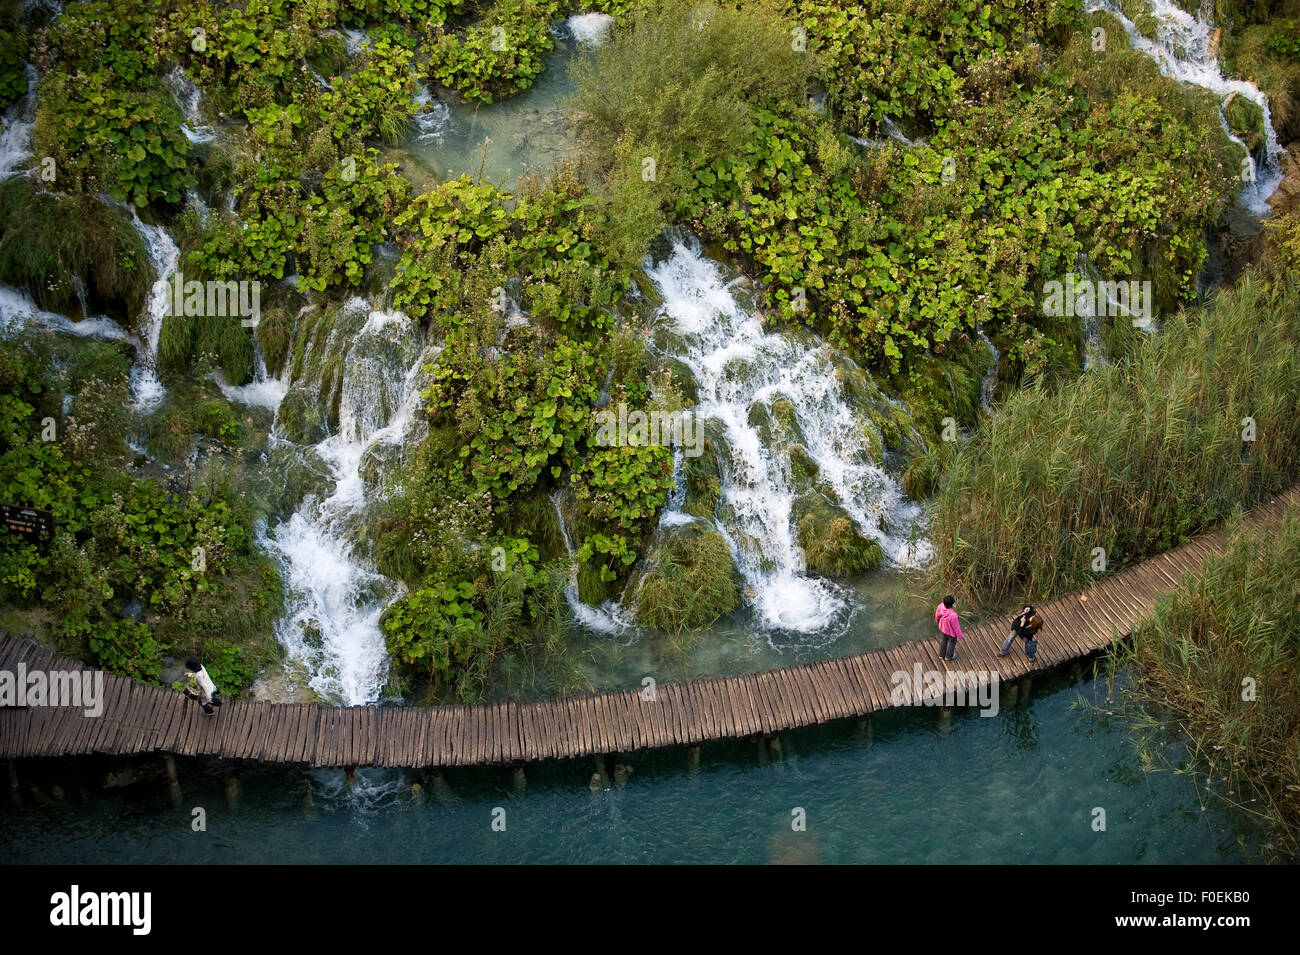 People on walkway at Velike kaskade, viewed  from above, Lower lakes, Plitvice Lakes National park, Croatia, October 2008 Stock Photo